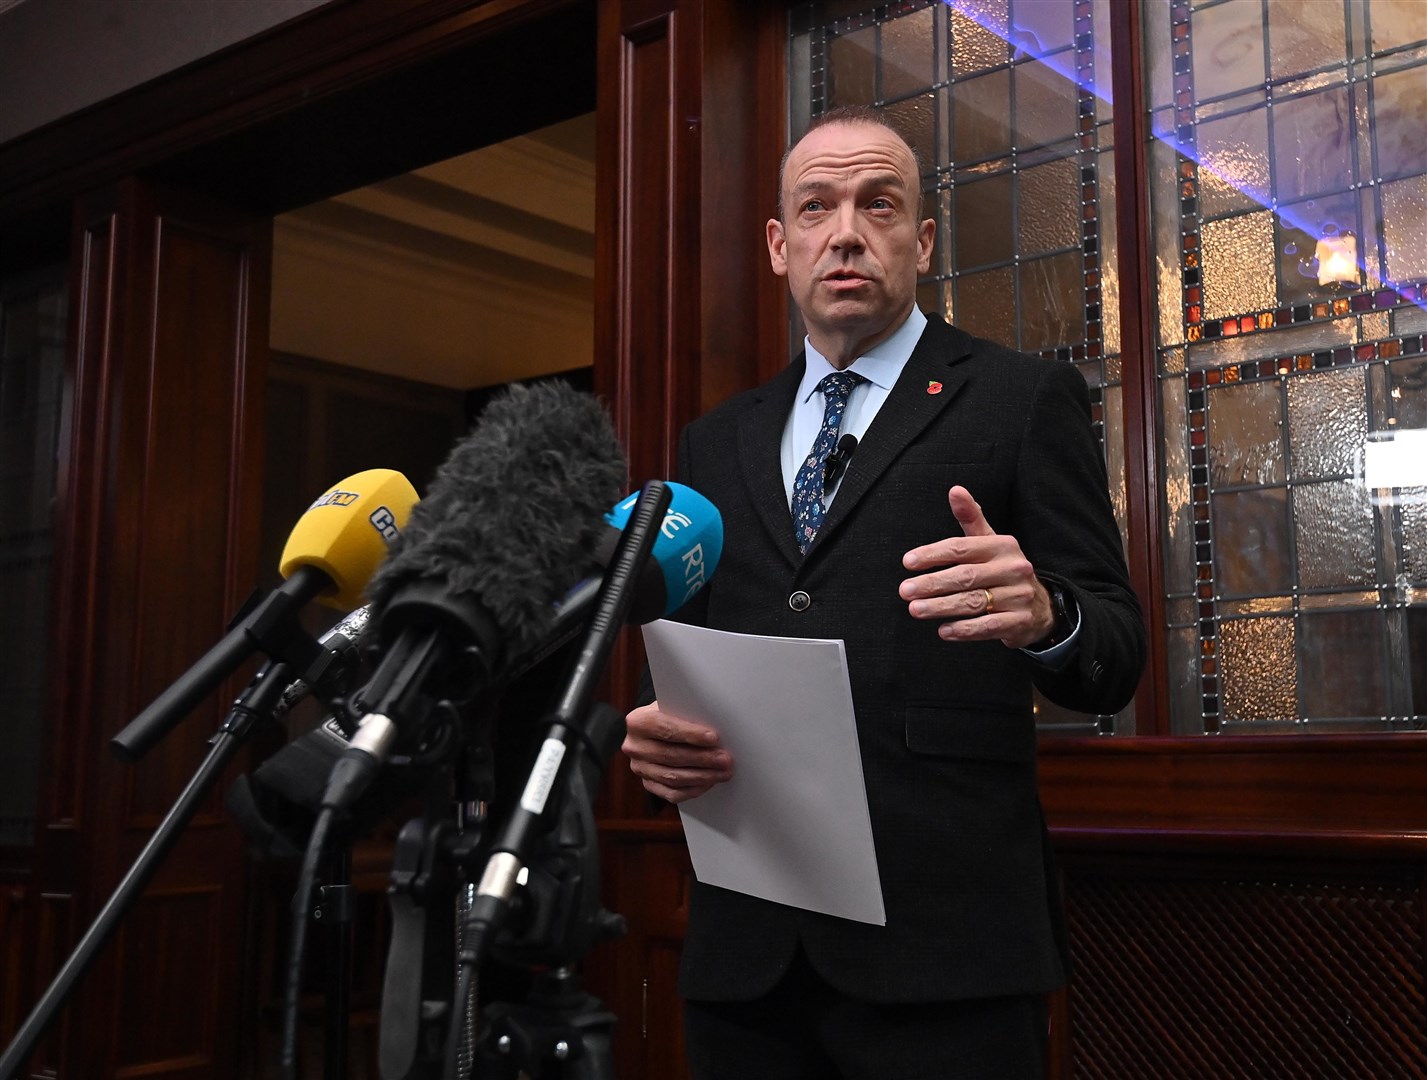 Northern Ireland Secretary Chris Heaton-Harris speaking to the media in Newry on Wednesday (Oliver McVeigh/PA)